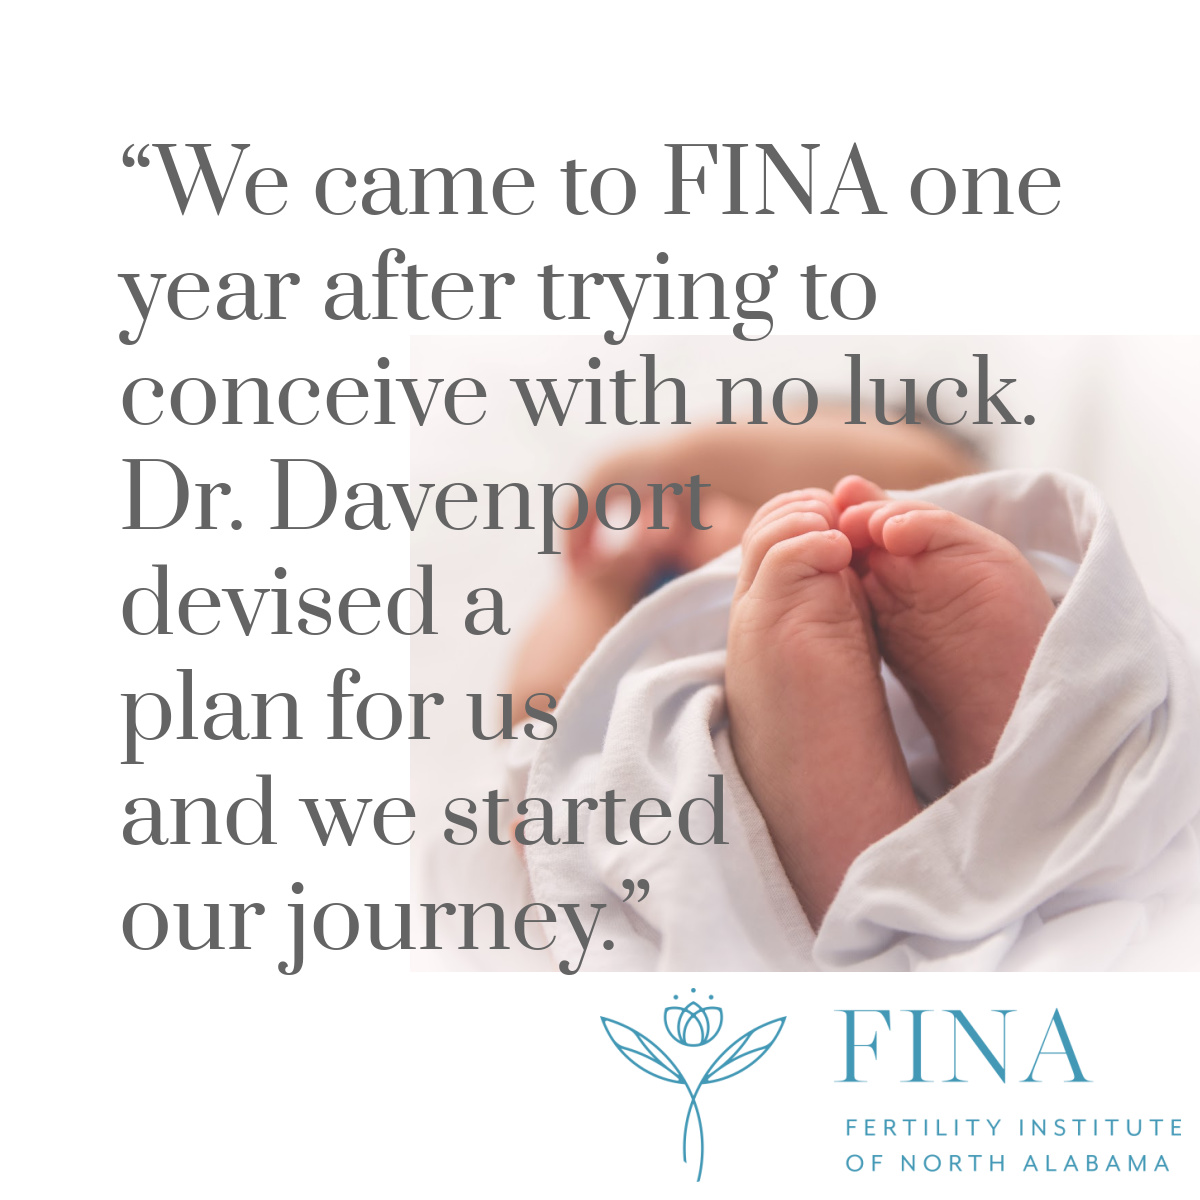 Here is one patient’s #FINA story…